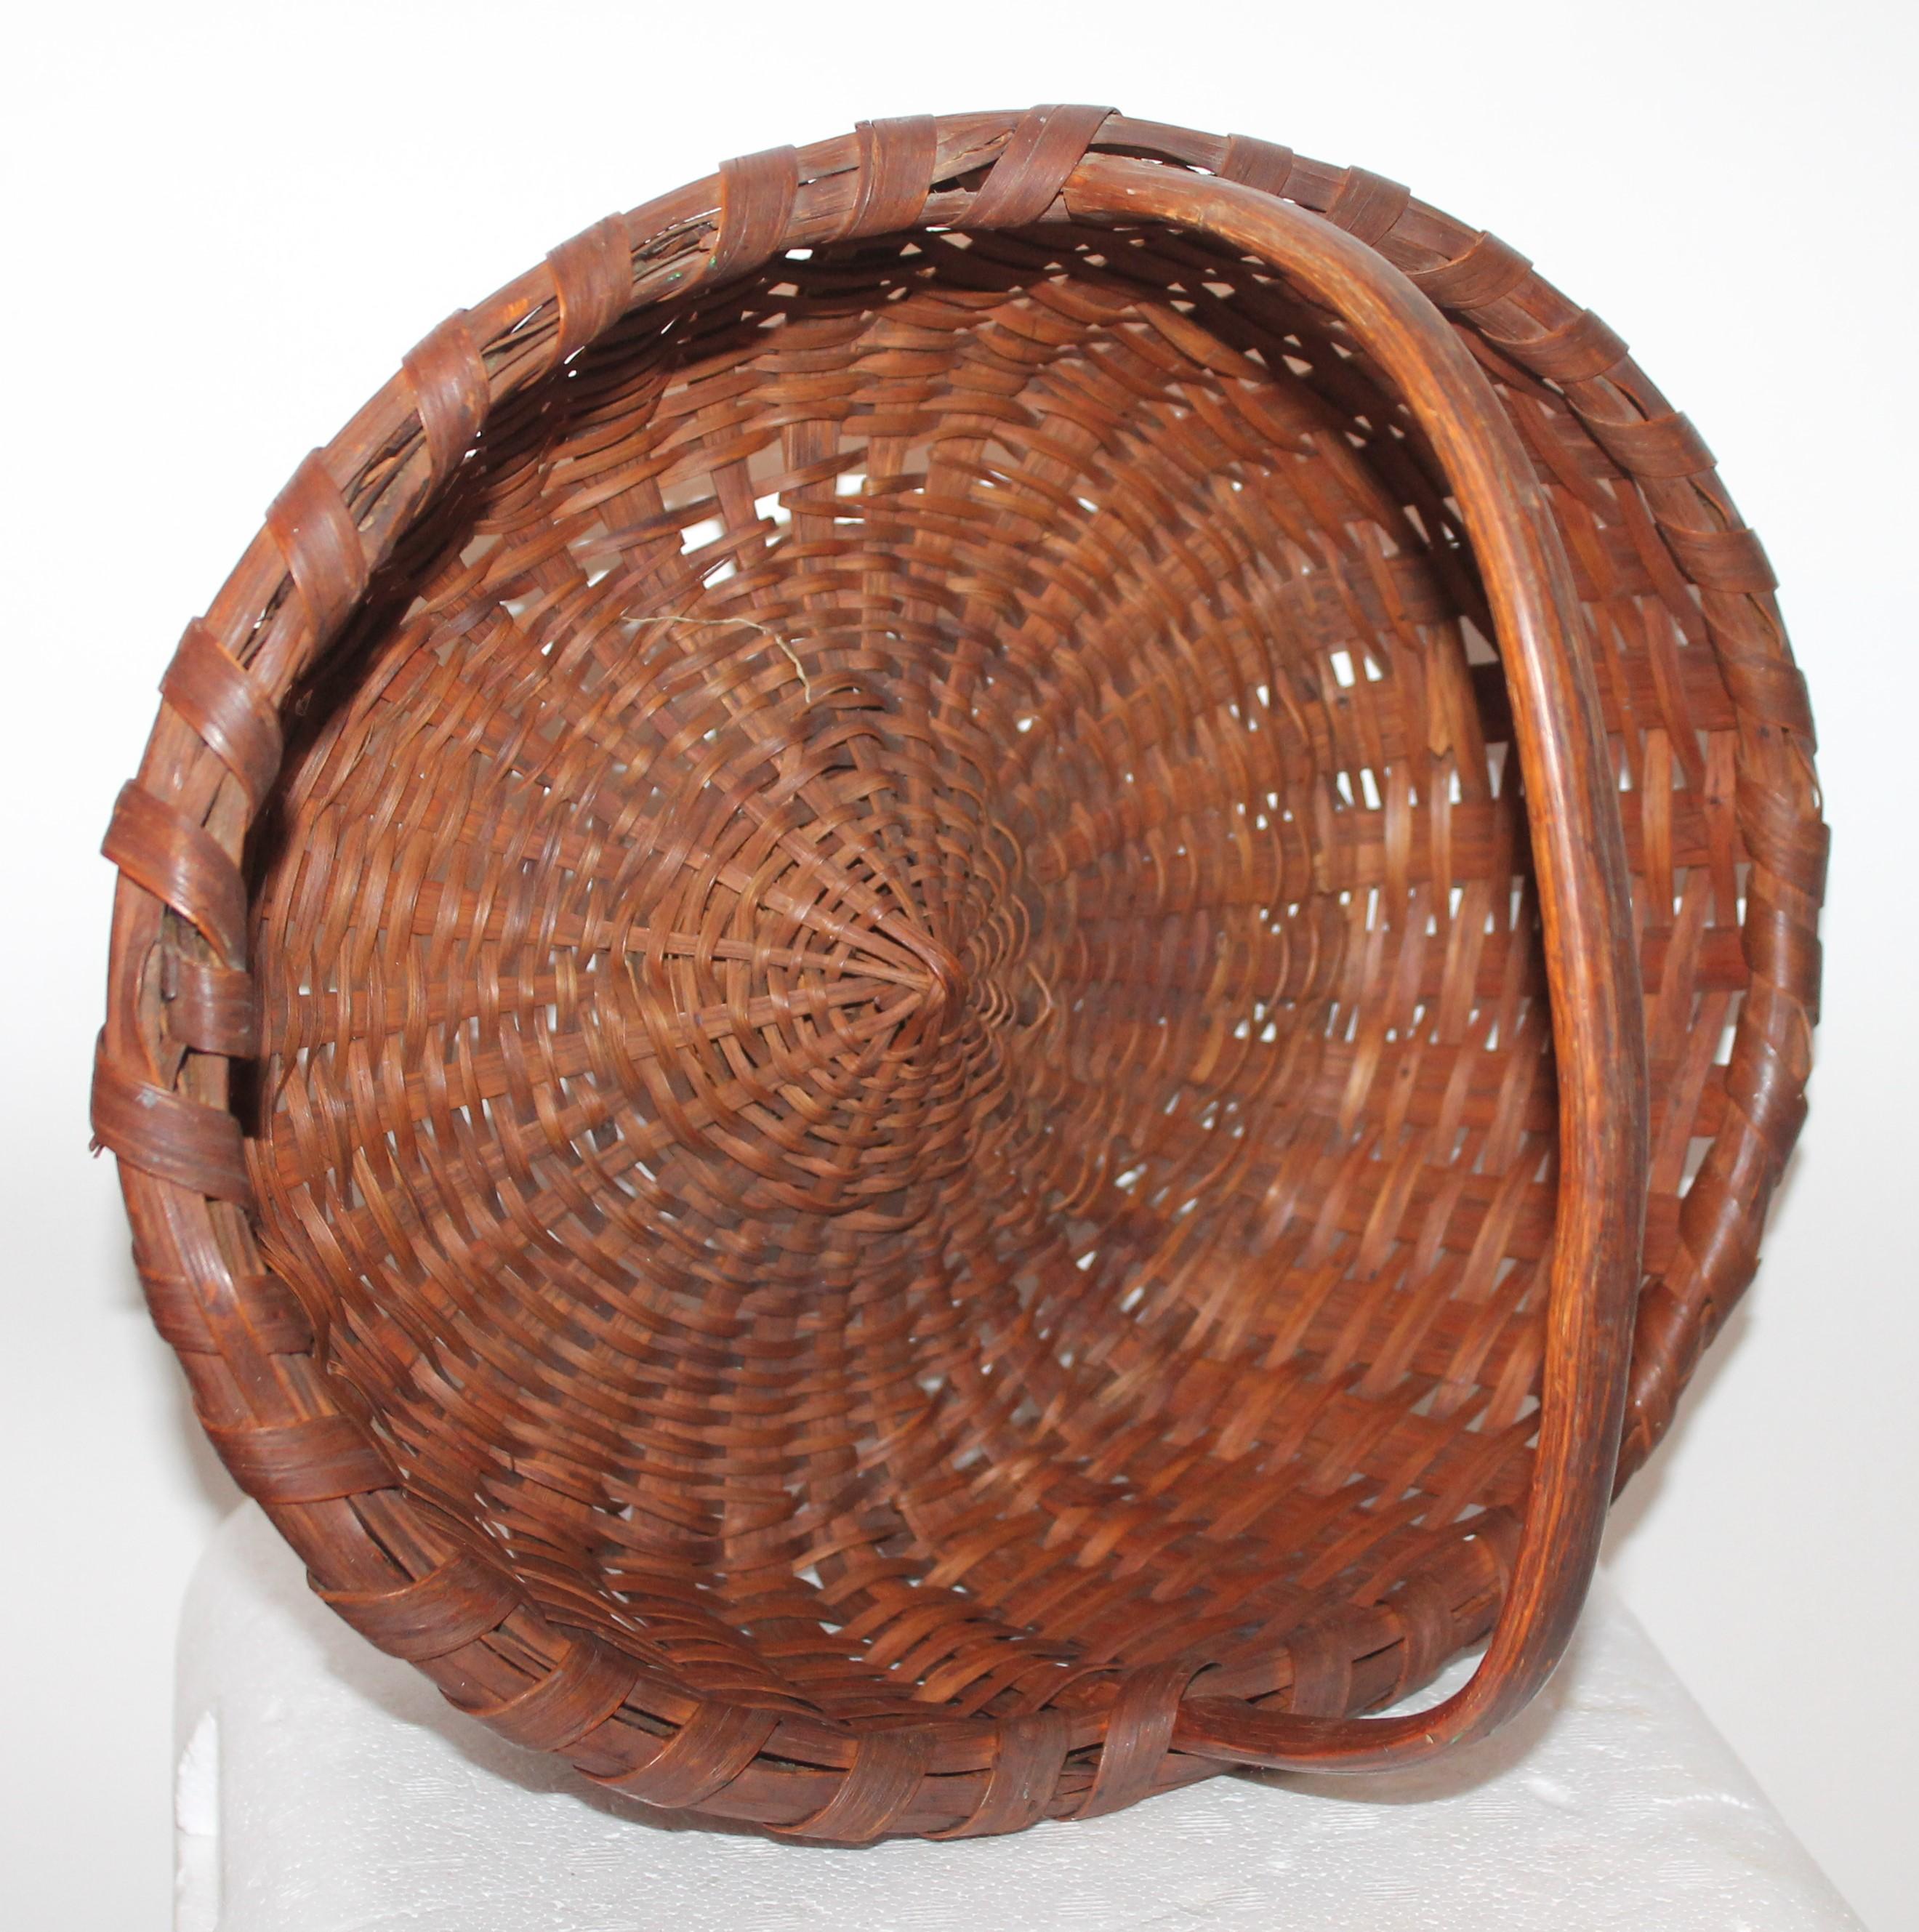 This early mid-19th century basket is in fine condition with minor wear on base but very good condition. The handle is in great shape as well. Found in eastern shore Maryland.